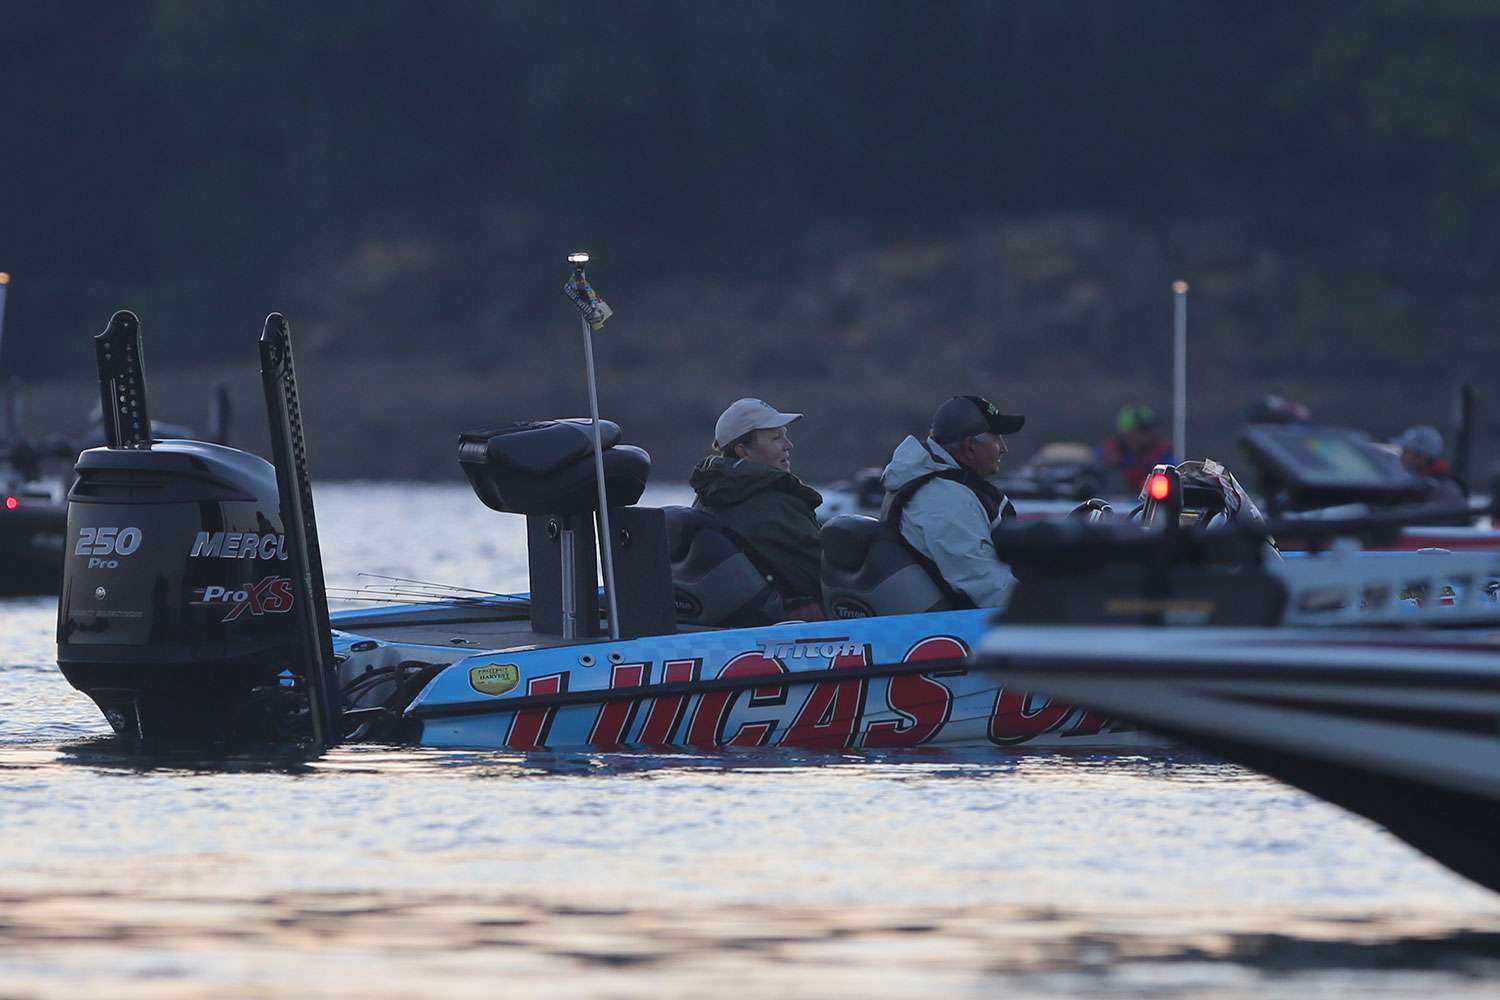 Fishing was difficult for much of the field during the opening round of competition at the Bass Pro Shops Southern Open #3 on Alabama's beautiful Smith Lake.